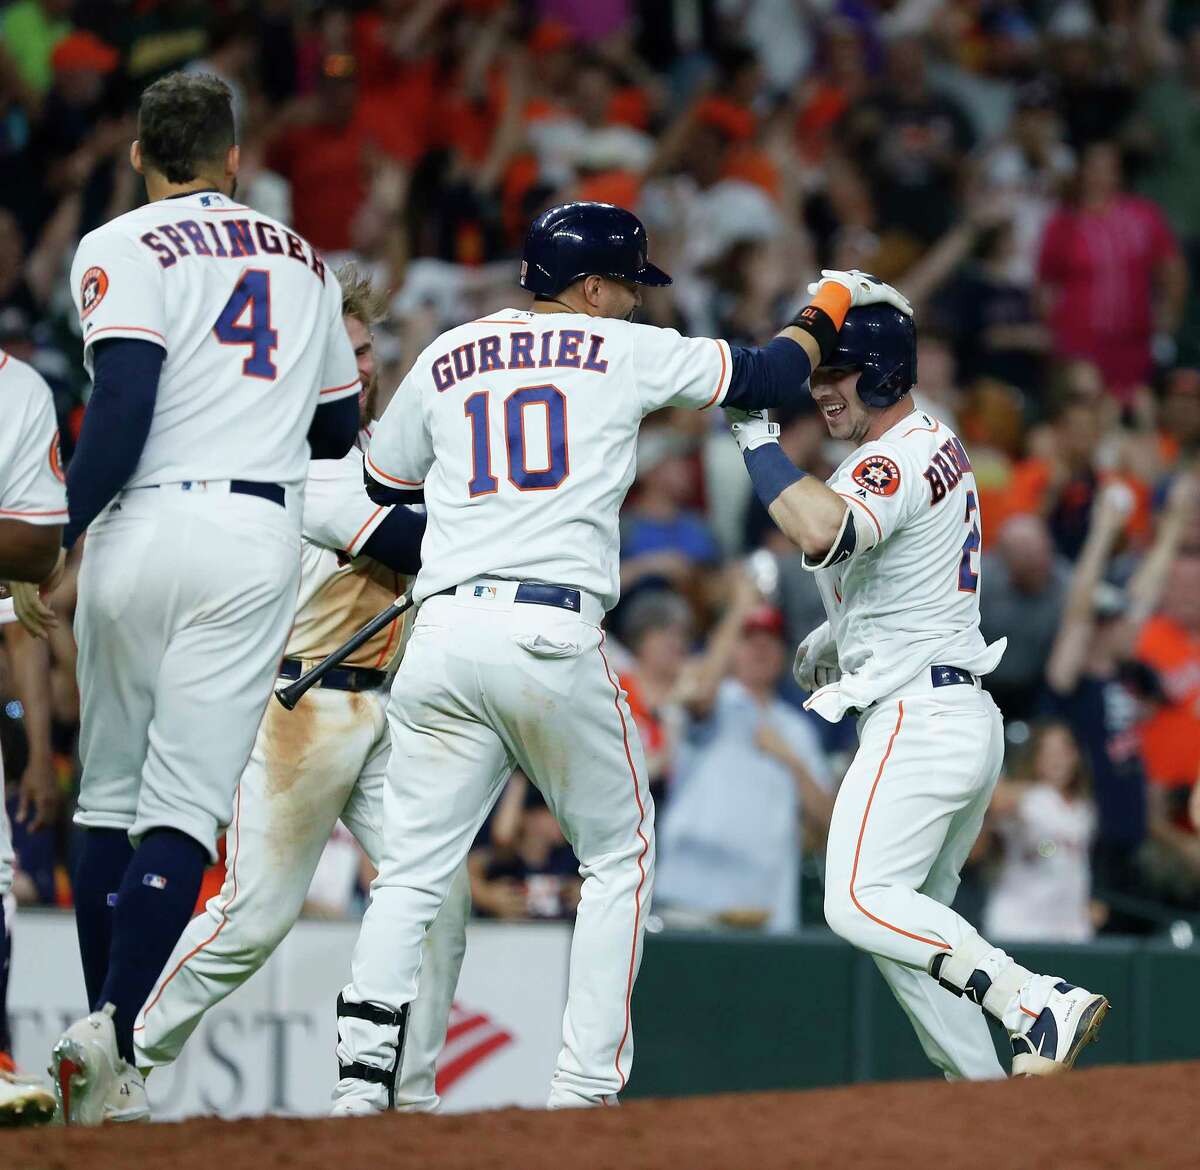 Houston Astros Alex Bregman (2) celebrates after Bregman reached on a single allowing Kyle Tucker to score the winning run during the eleventh inning of an MLB game at Minute Maid Park, Tuesday, July 10, 2018, in Houston.